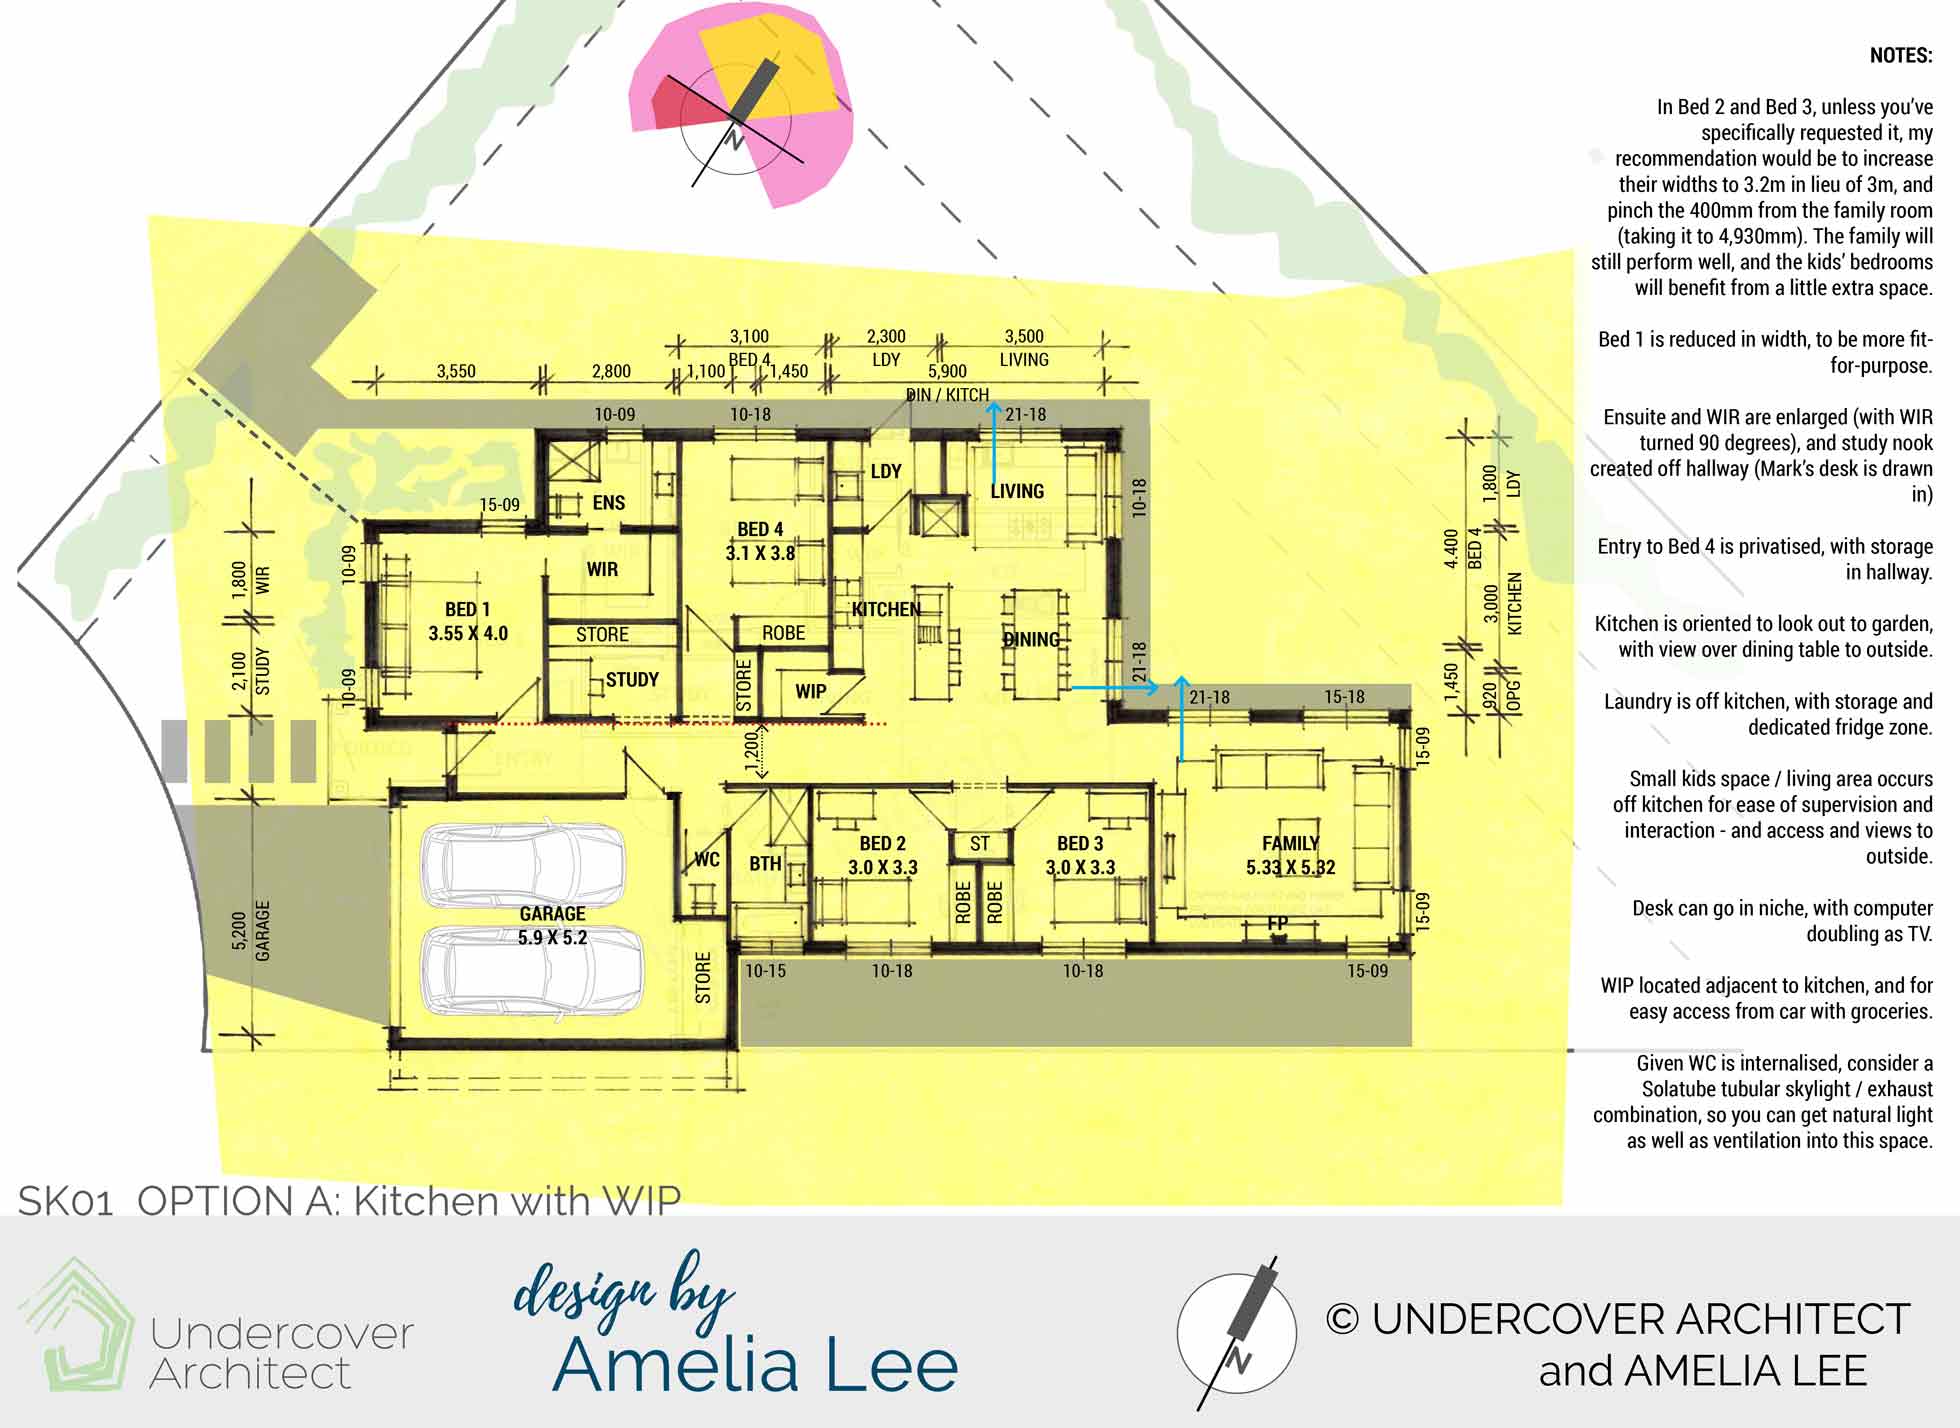 Amelia-Lee-affordable-compact-family-home-01